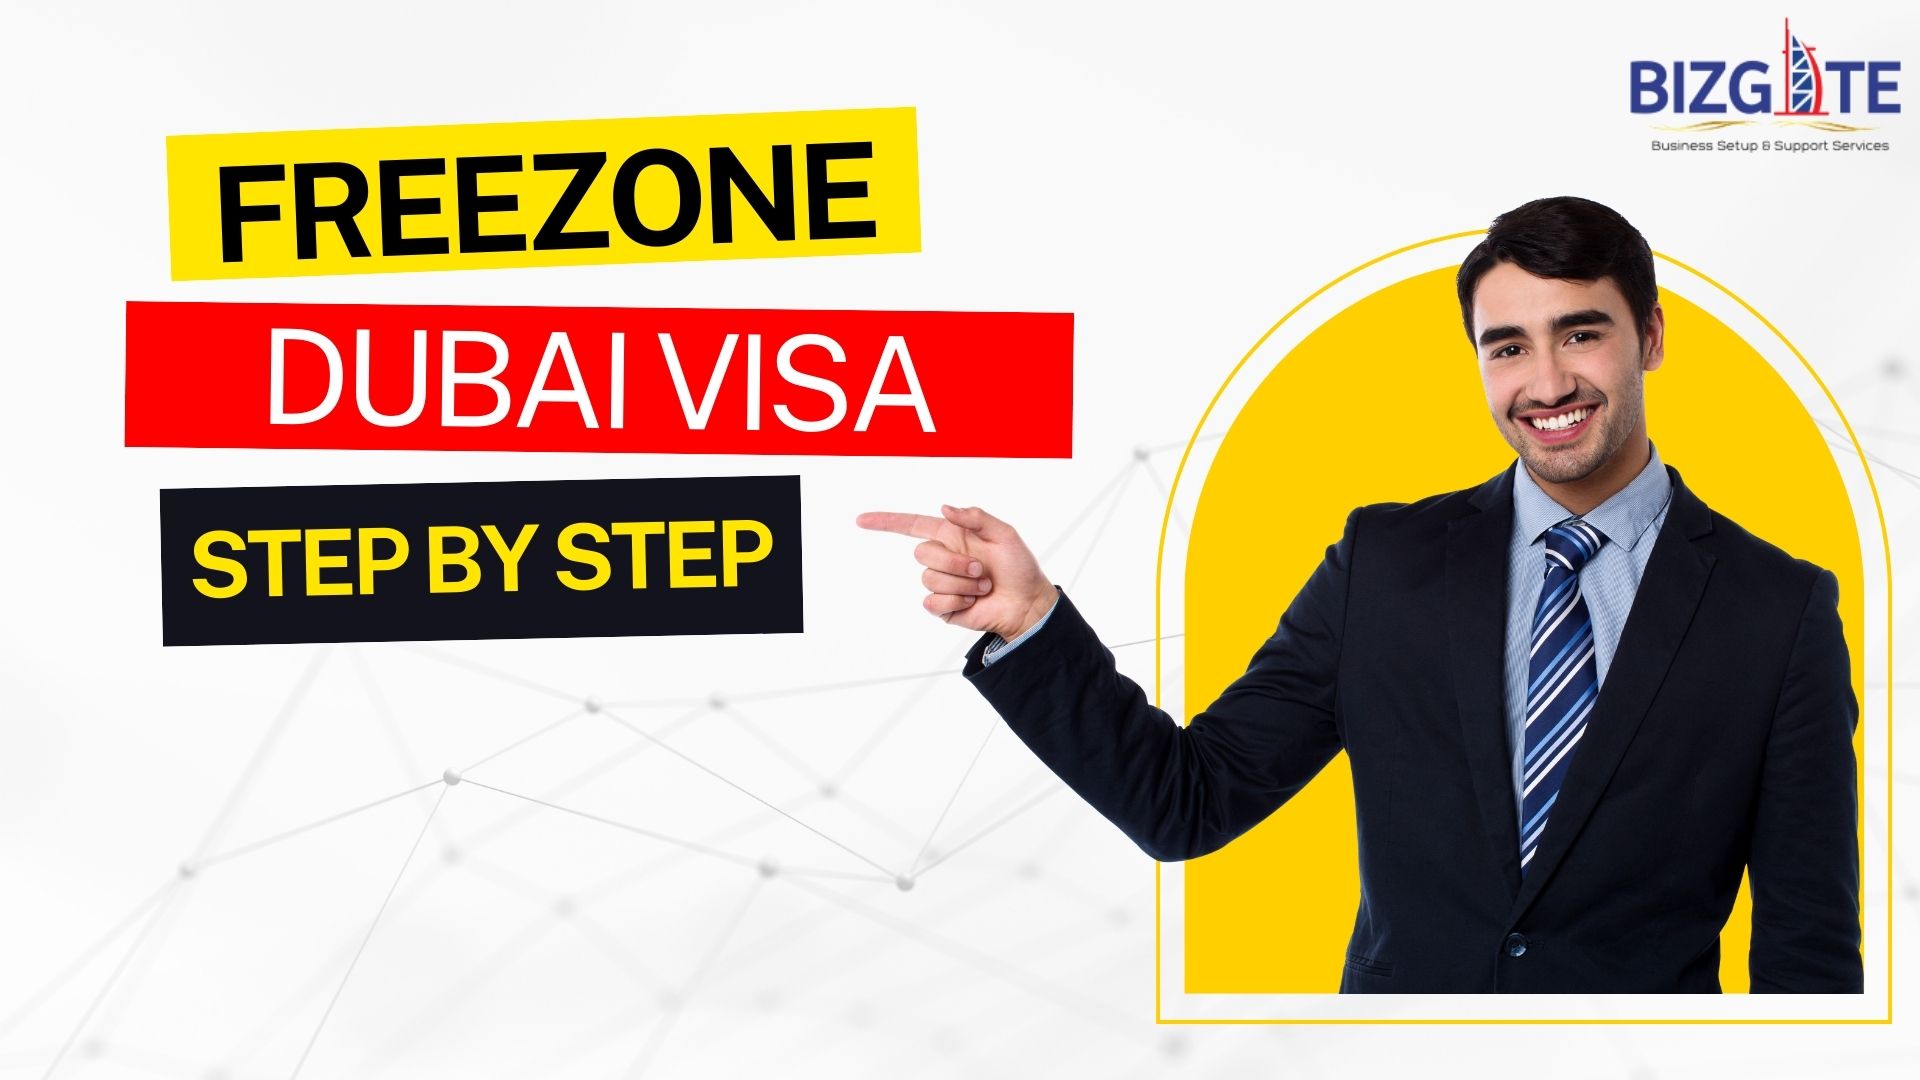 You are currently viewing Free Zone Visa Dubai – A Step By Step Guide 2022 | Business Setup in Dubai